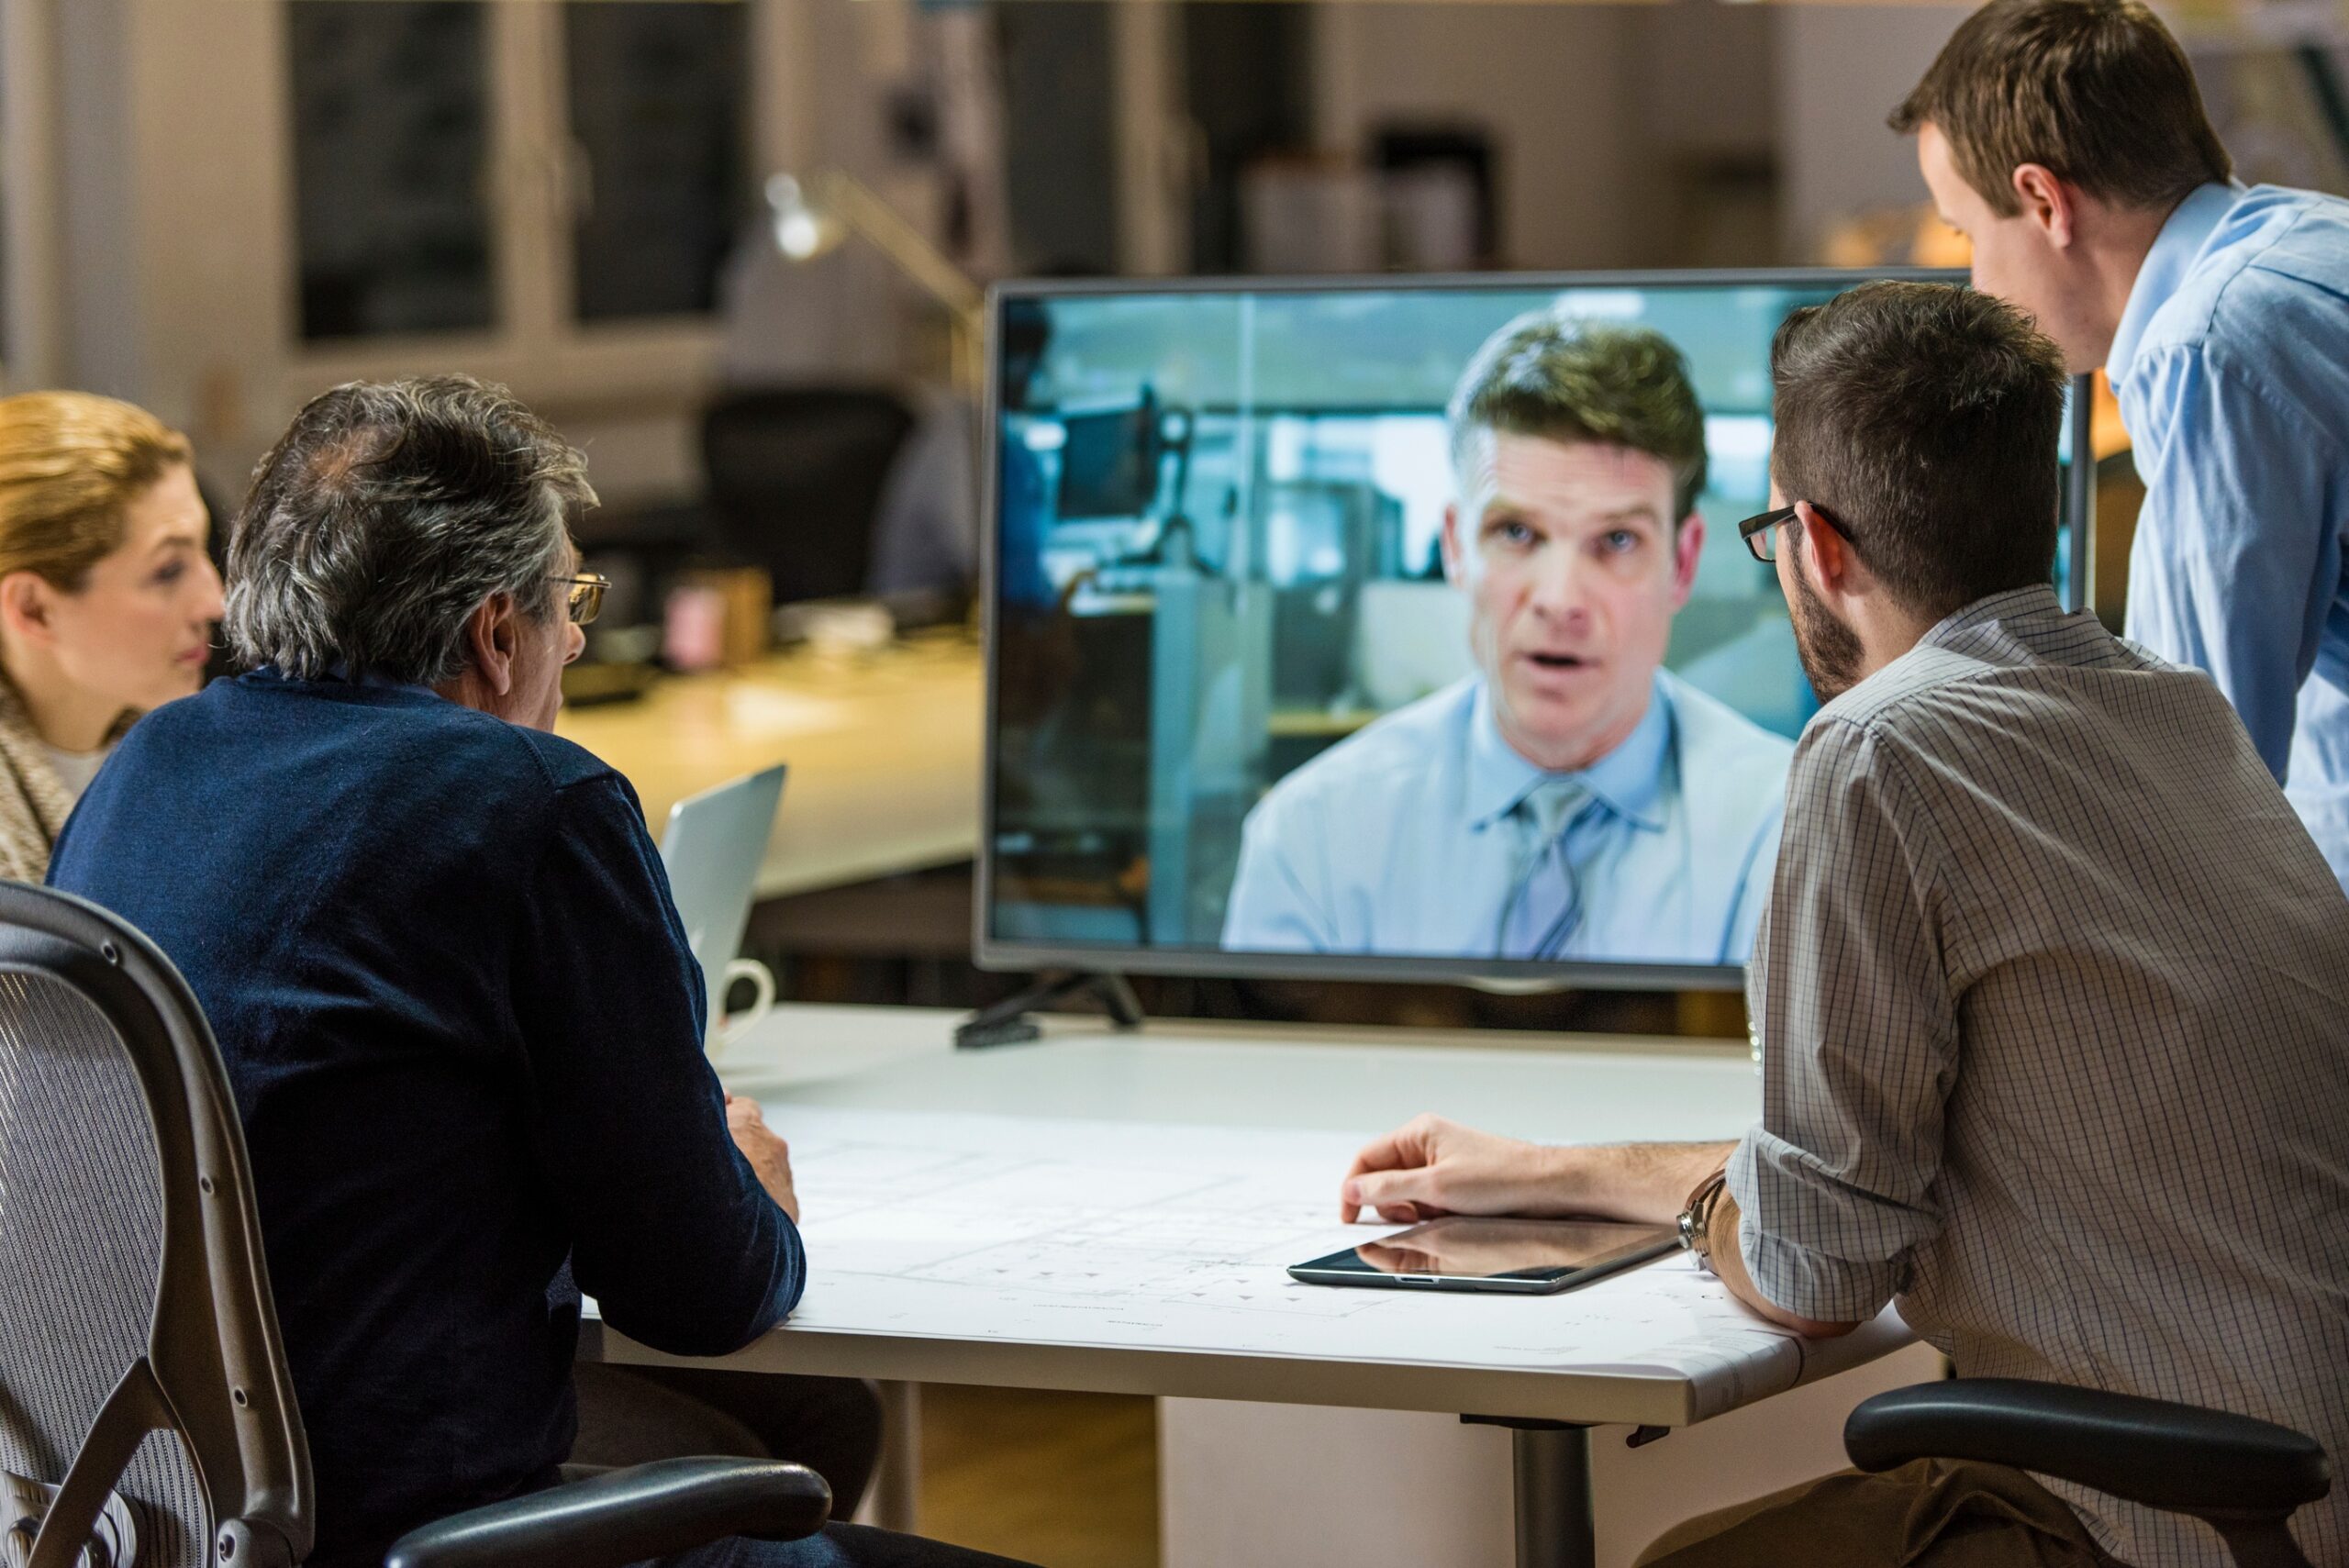 Videoconferencing allows clients to pick up body language cues